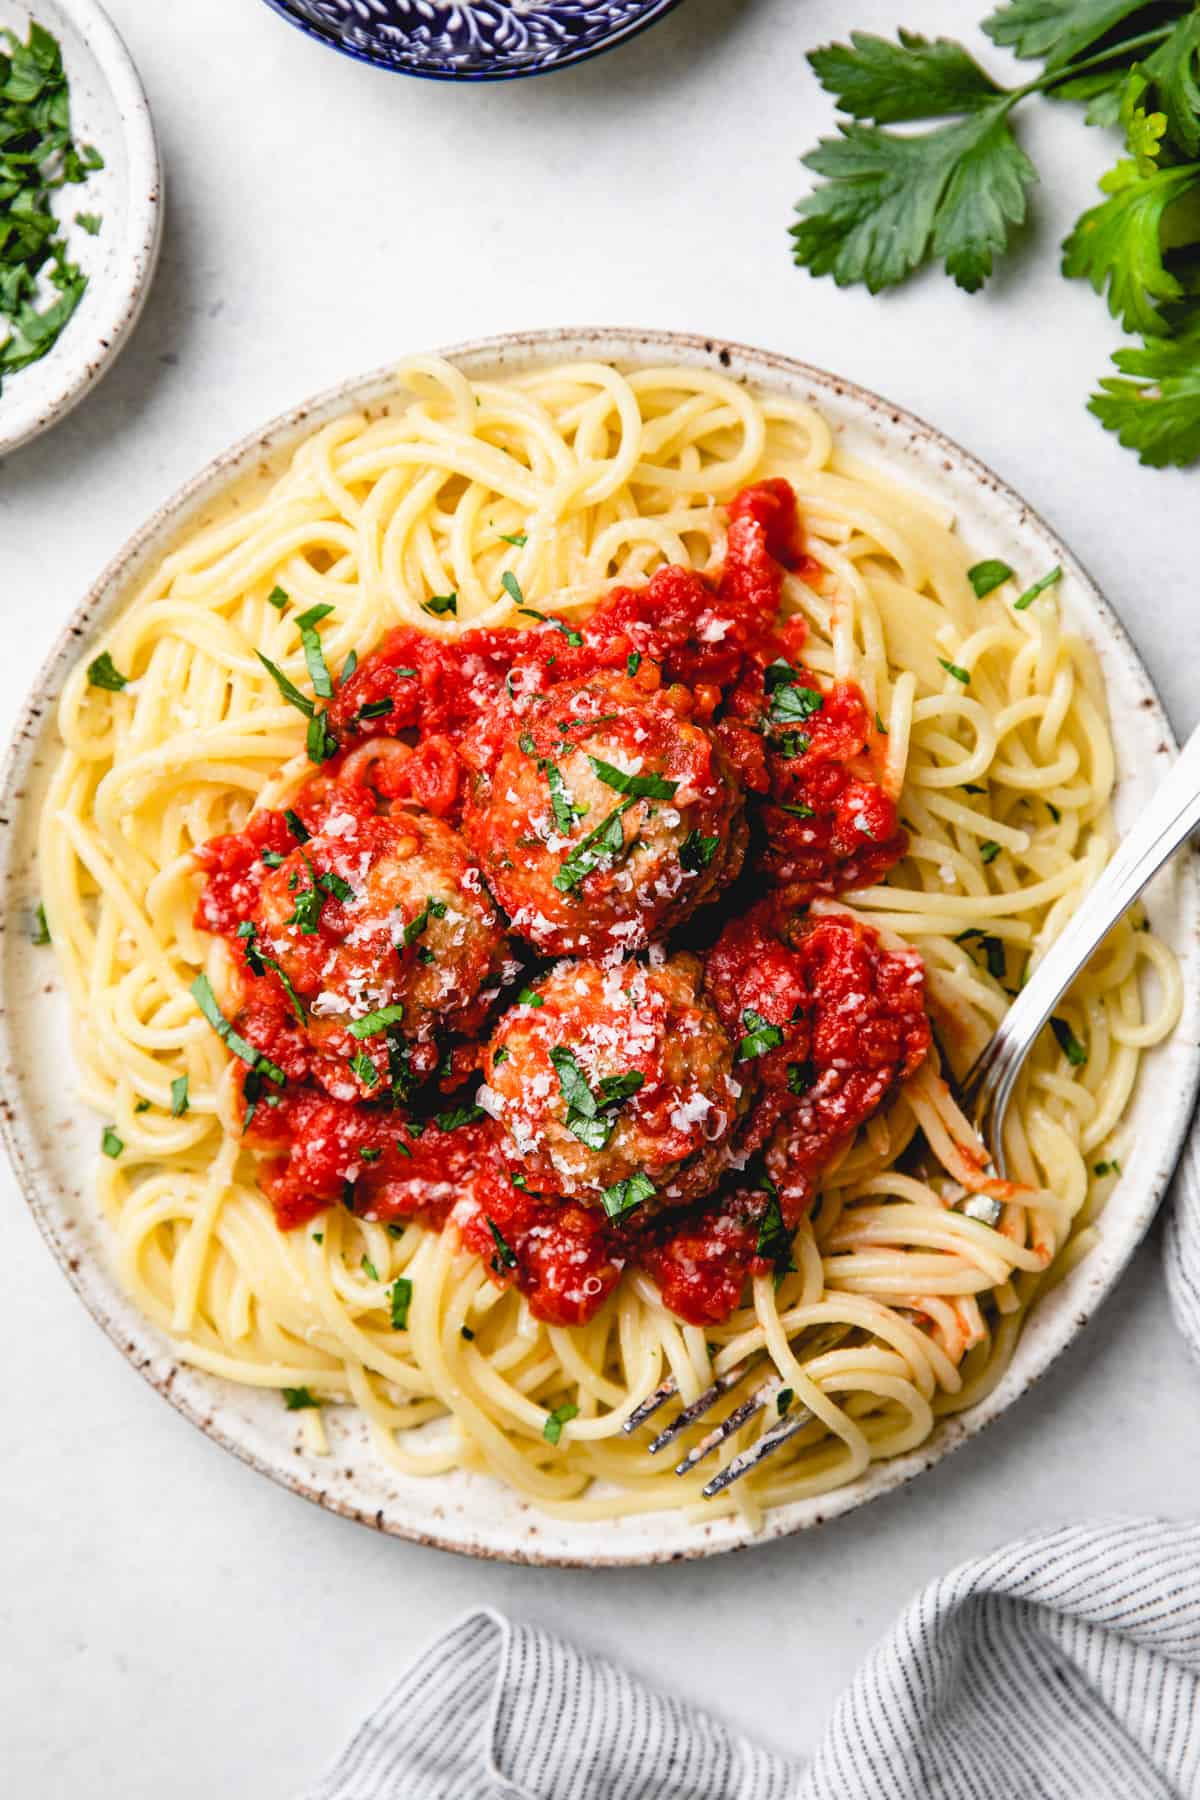 Meatballs with tomato sauce and spaghetti on a plate with a fork.